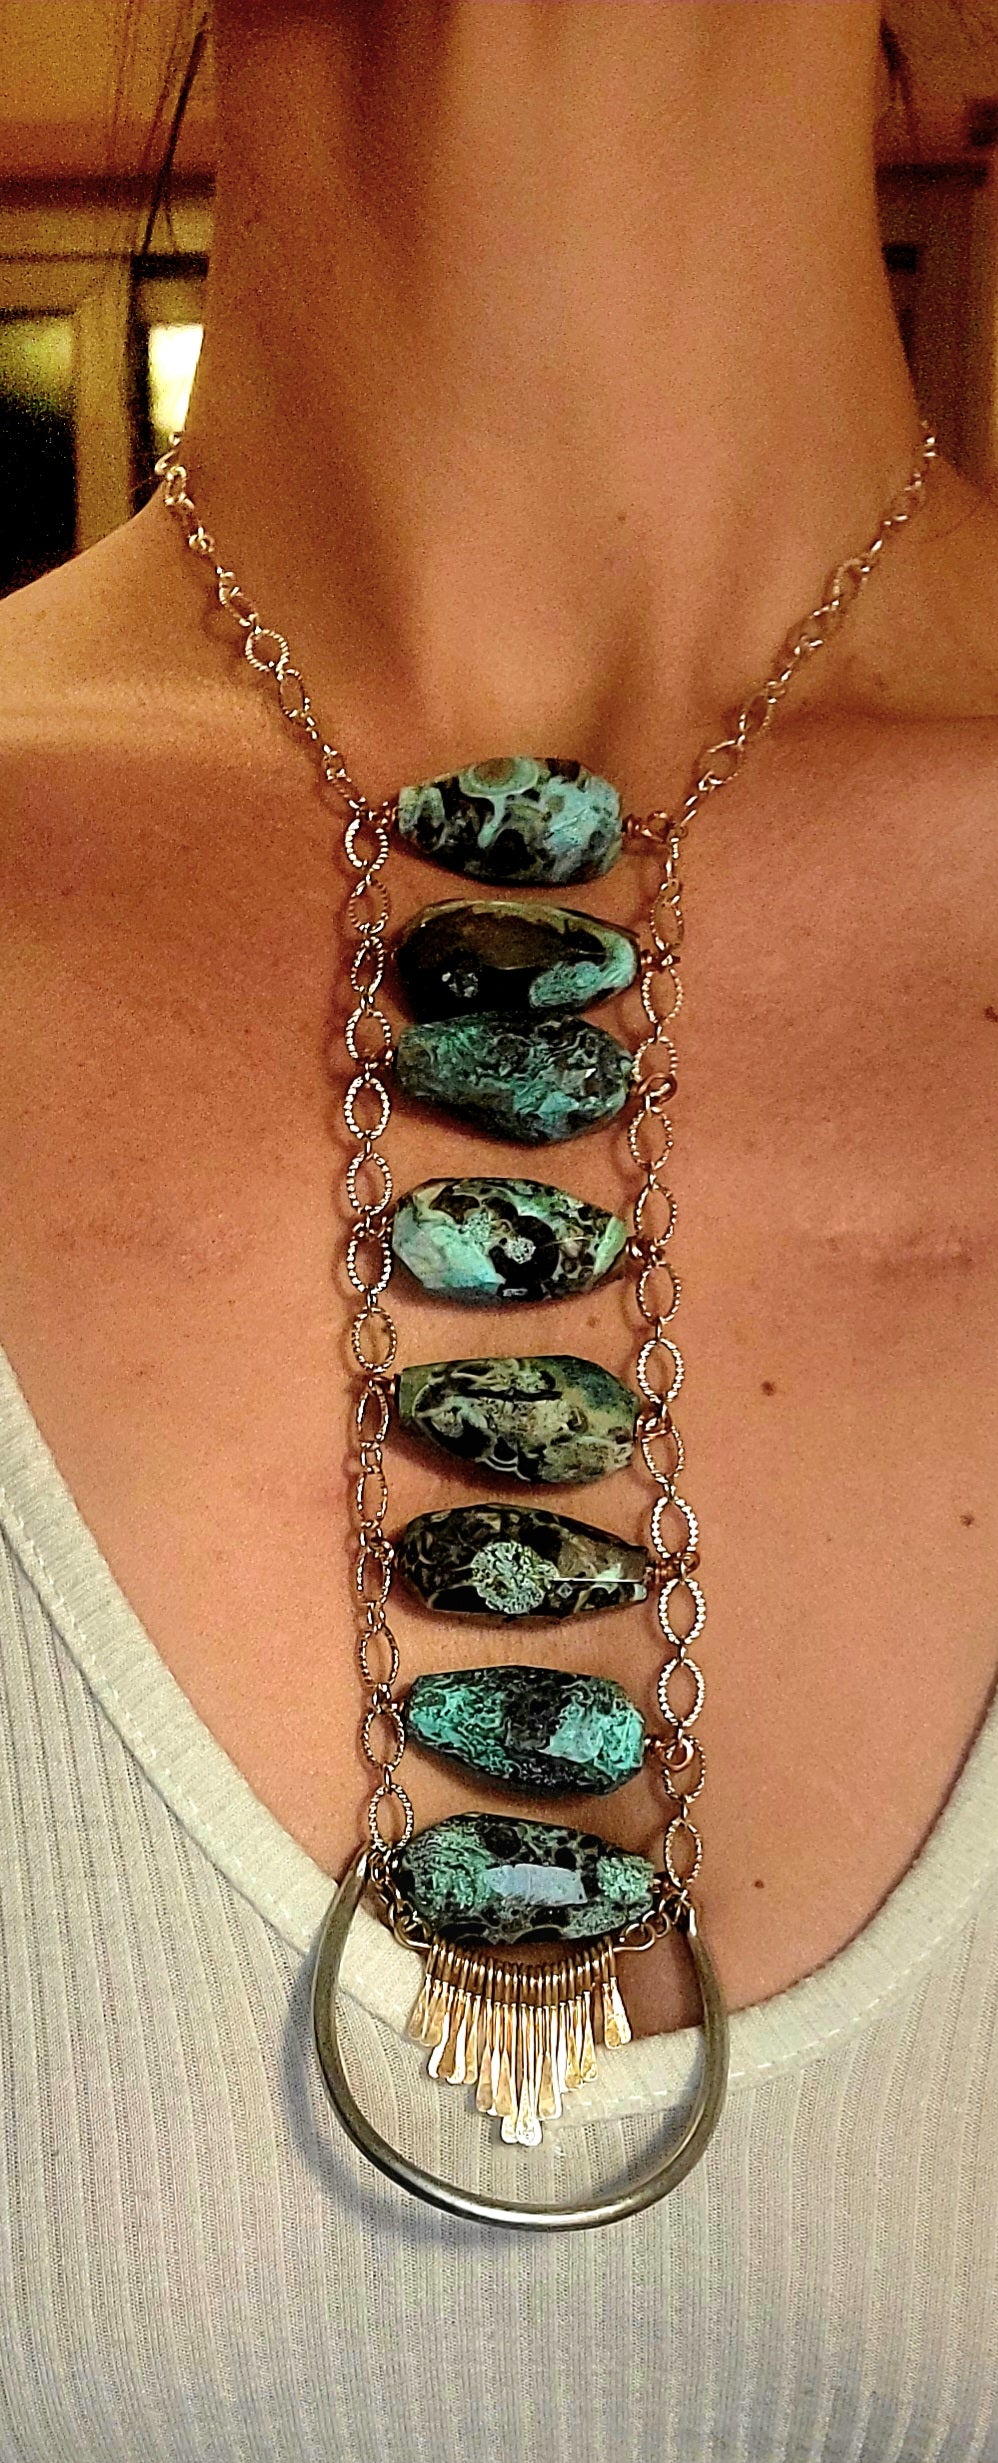 Necklace - Turquoise and mixed metals